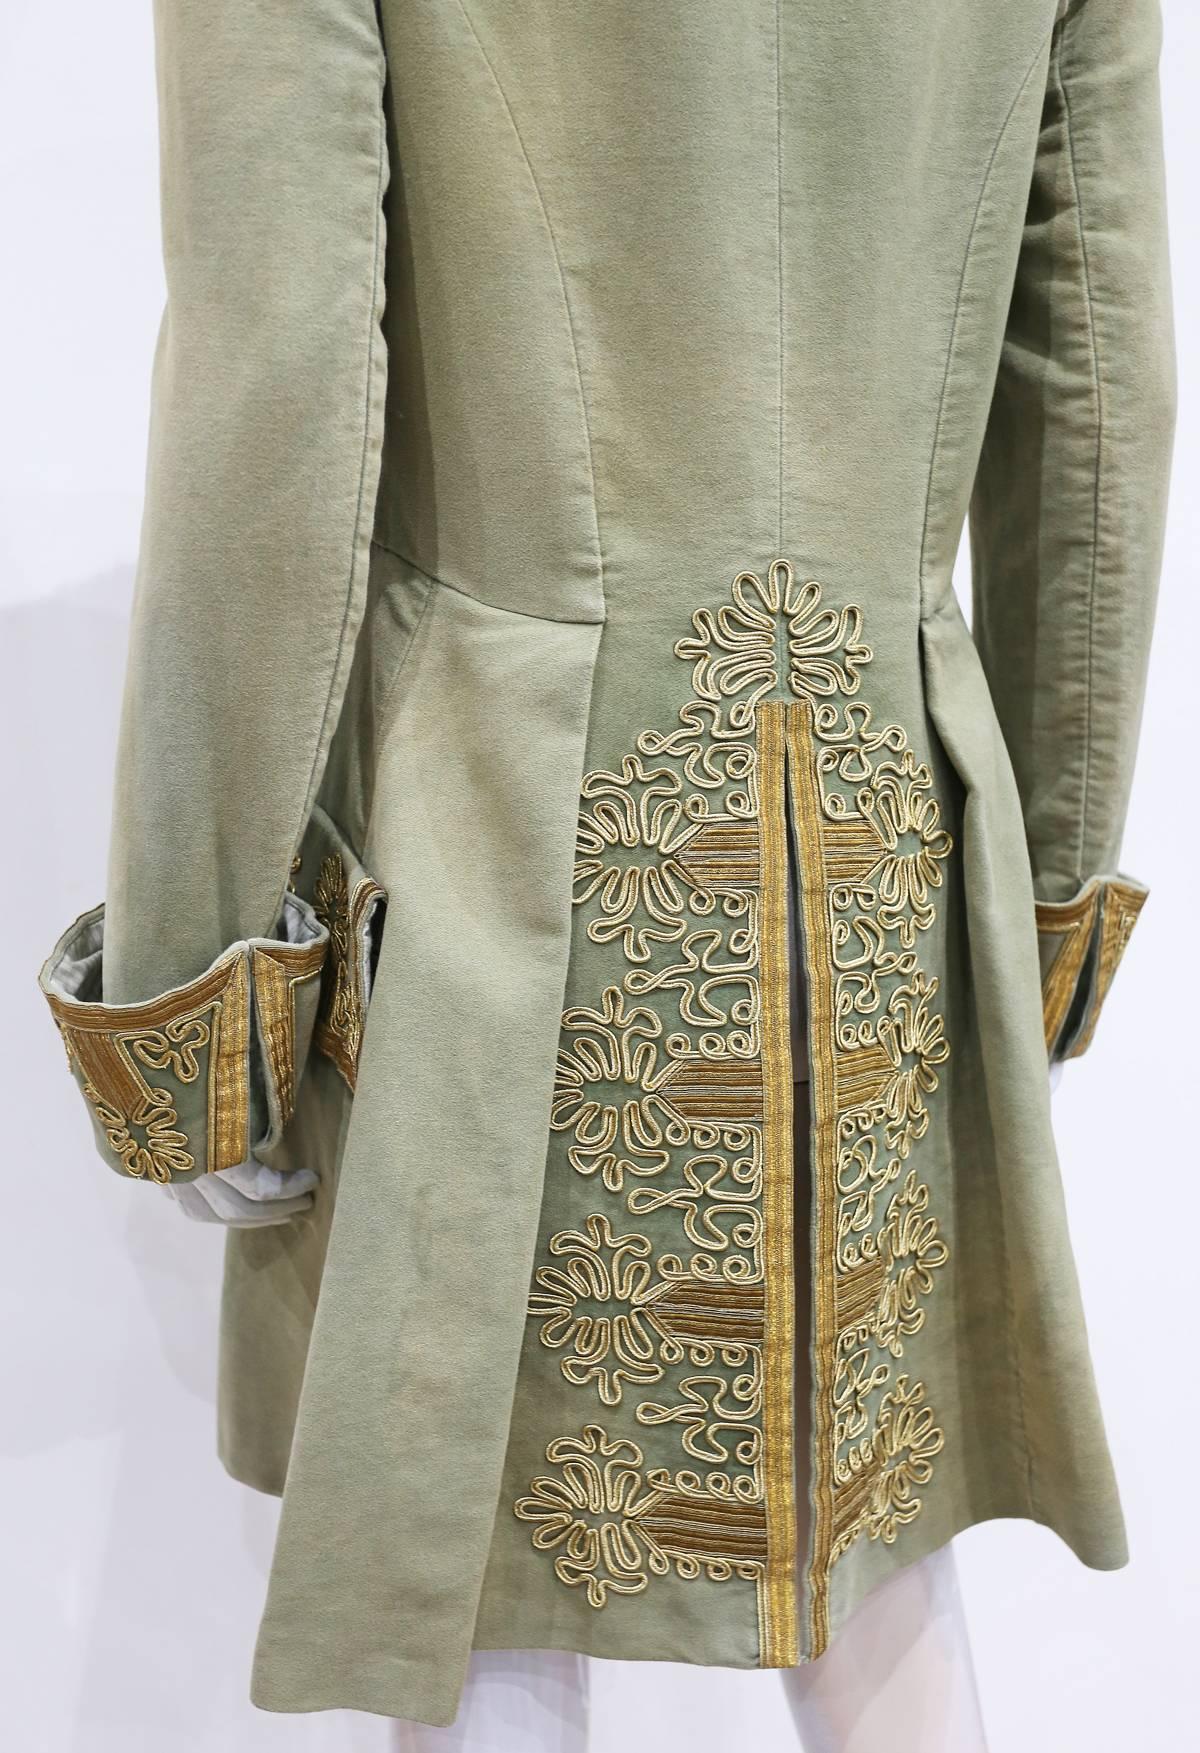 Ralph Lauren military inspired Napoleon jacket with lame embroidery, c. 2000s 1